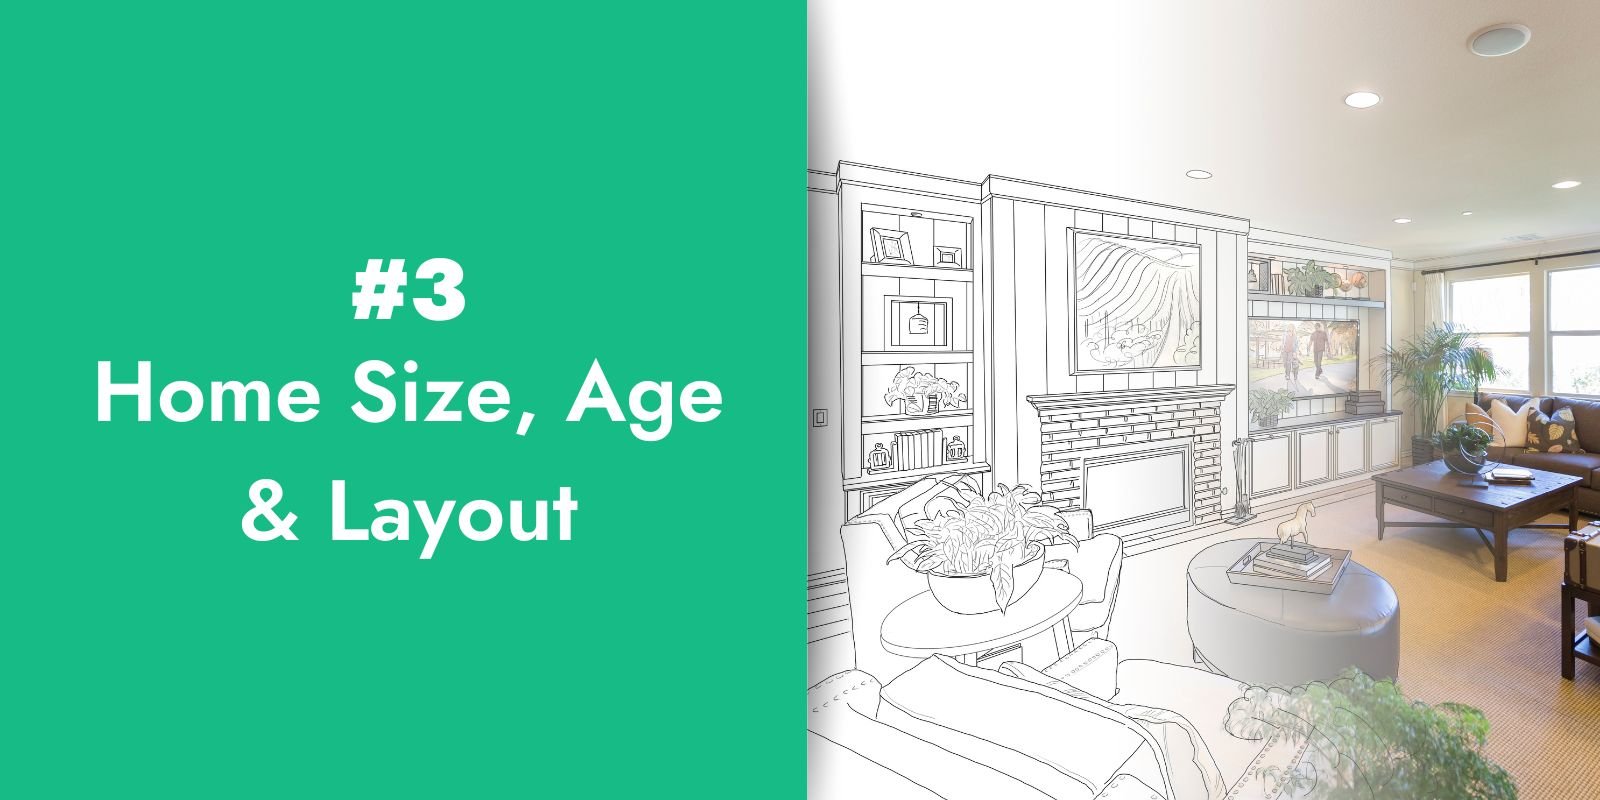 3. Home Size Age & Layout